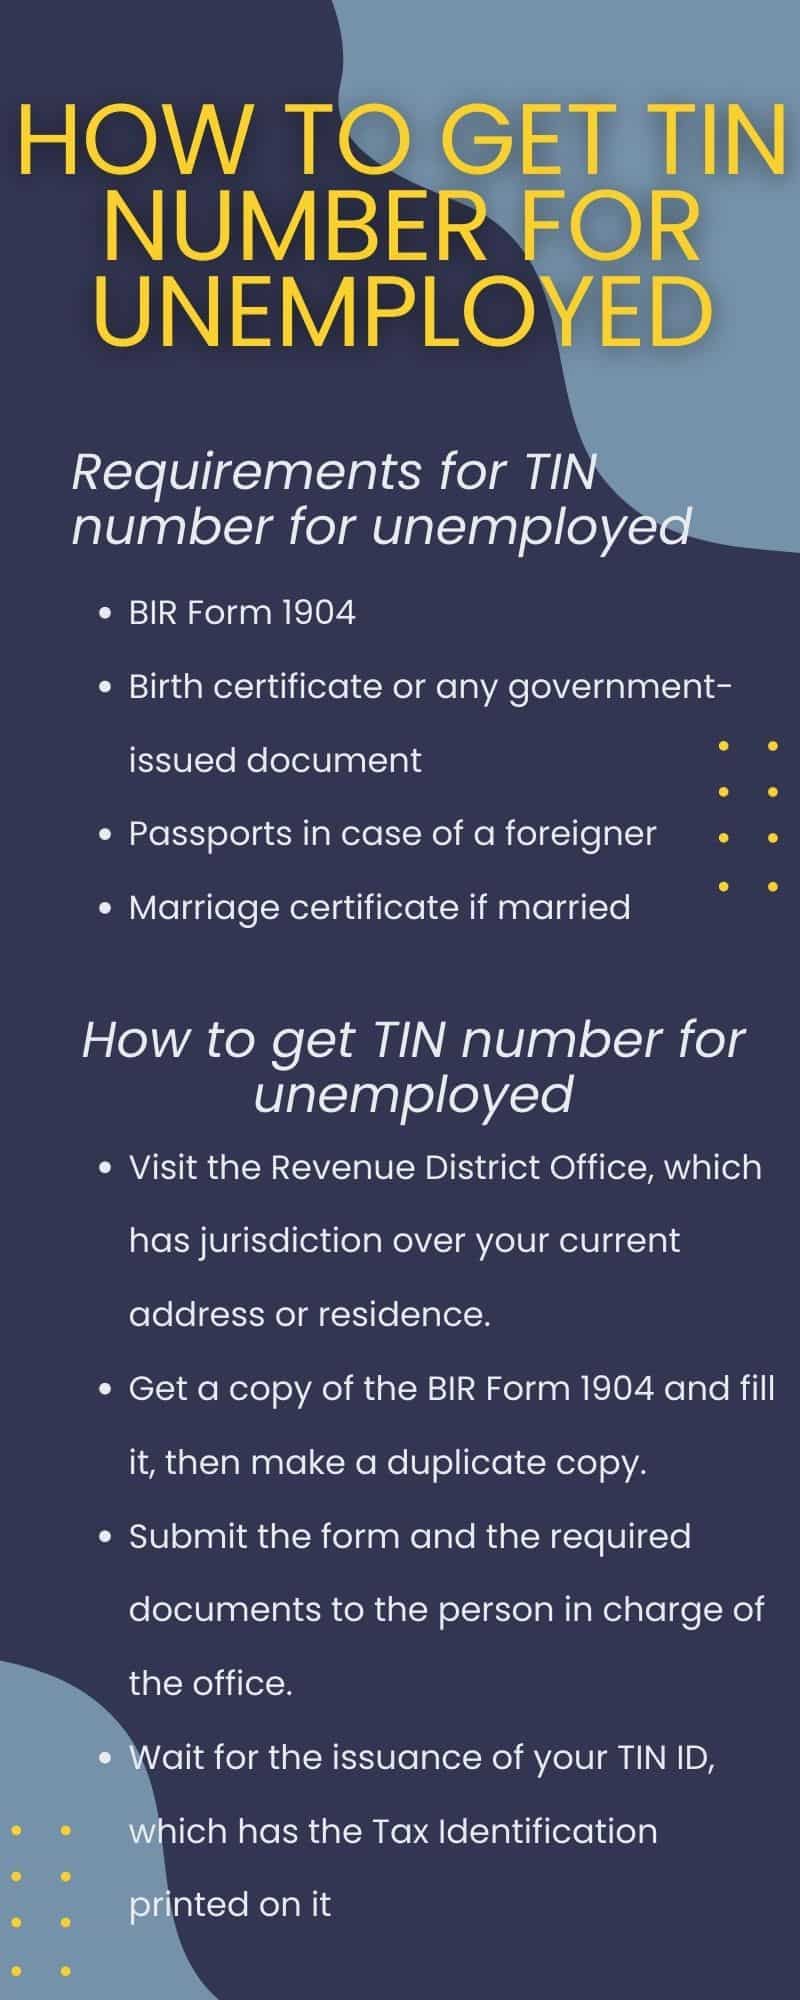 How to get TIN number for unemployed